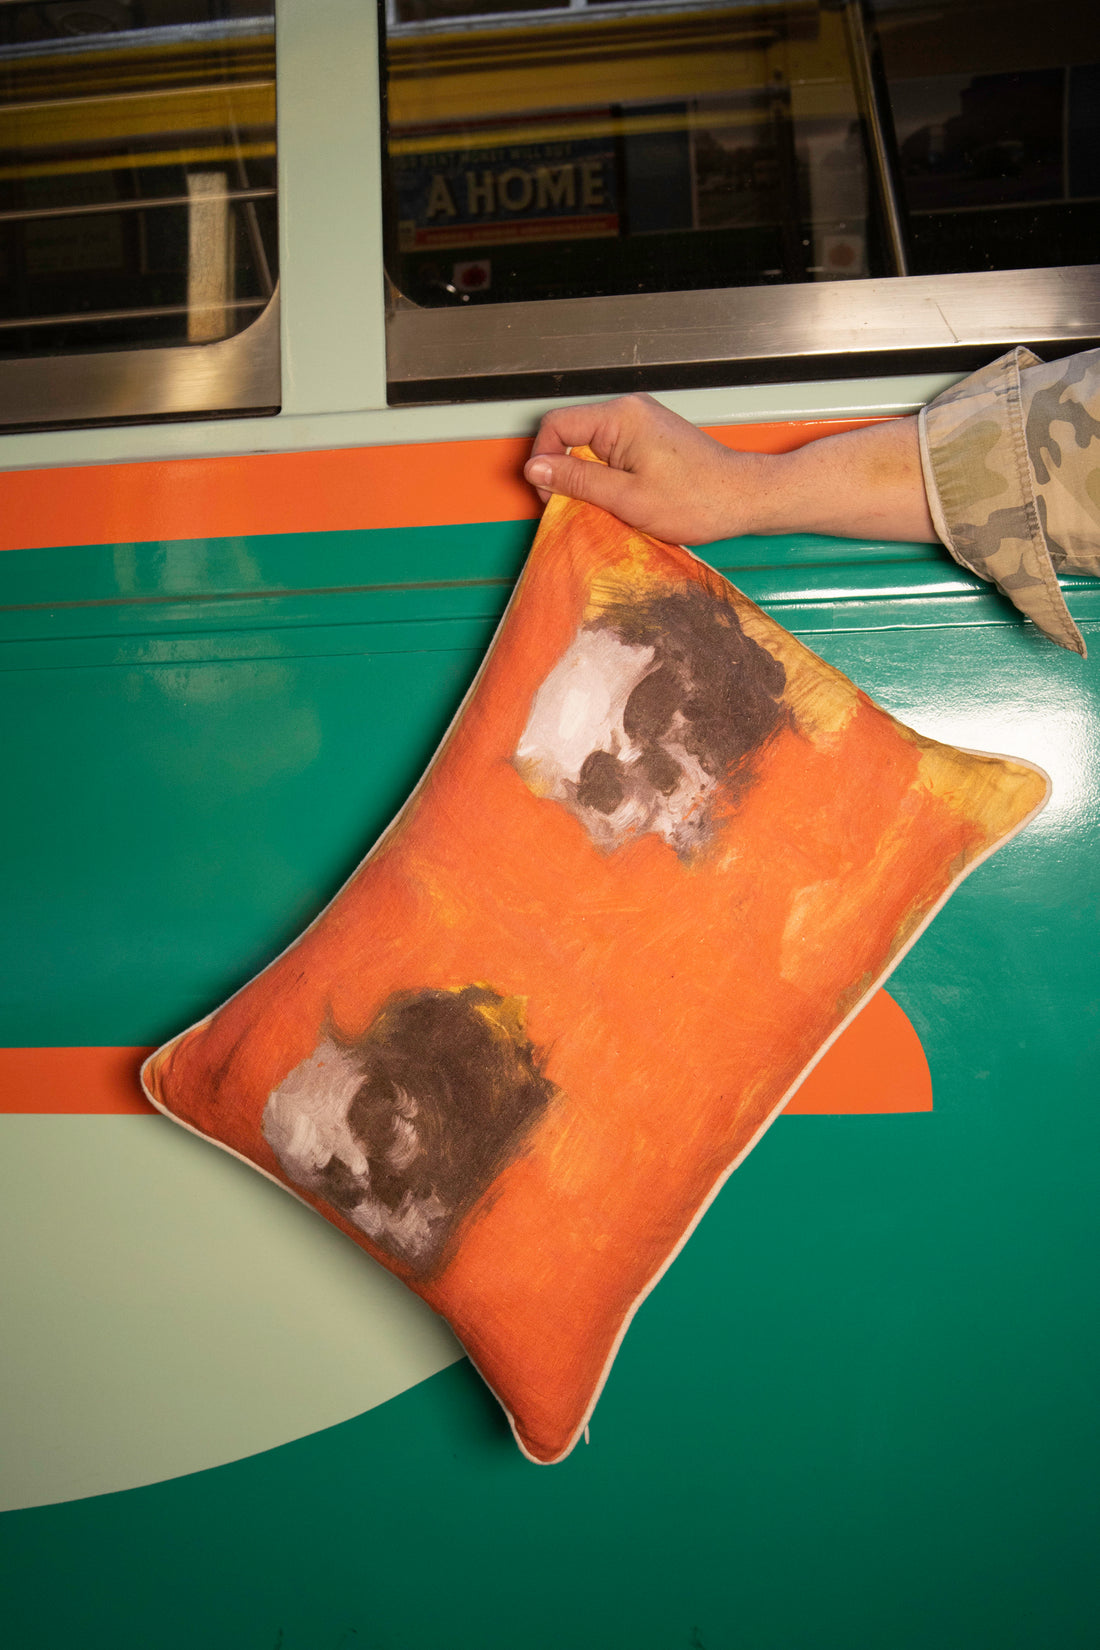 A linen pillow with a painted artwork printed on it, depicting two human skulls against an orange background, is held by a persons arm in front of the side of a trolley. The 100% Natural European Linen Pillow Includes 10/90 Down / Feather Blend Insert. Sophisticated and refined. Modern yet classic. A true friend for years to come. Dimensions: 17"x24" 